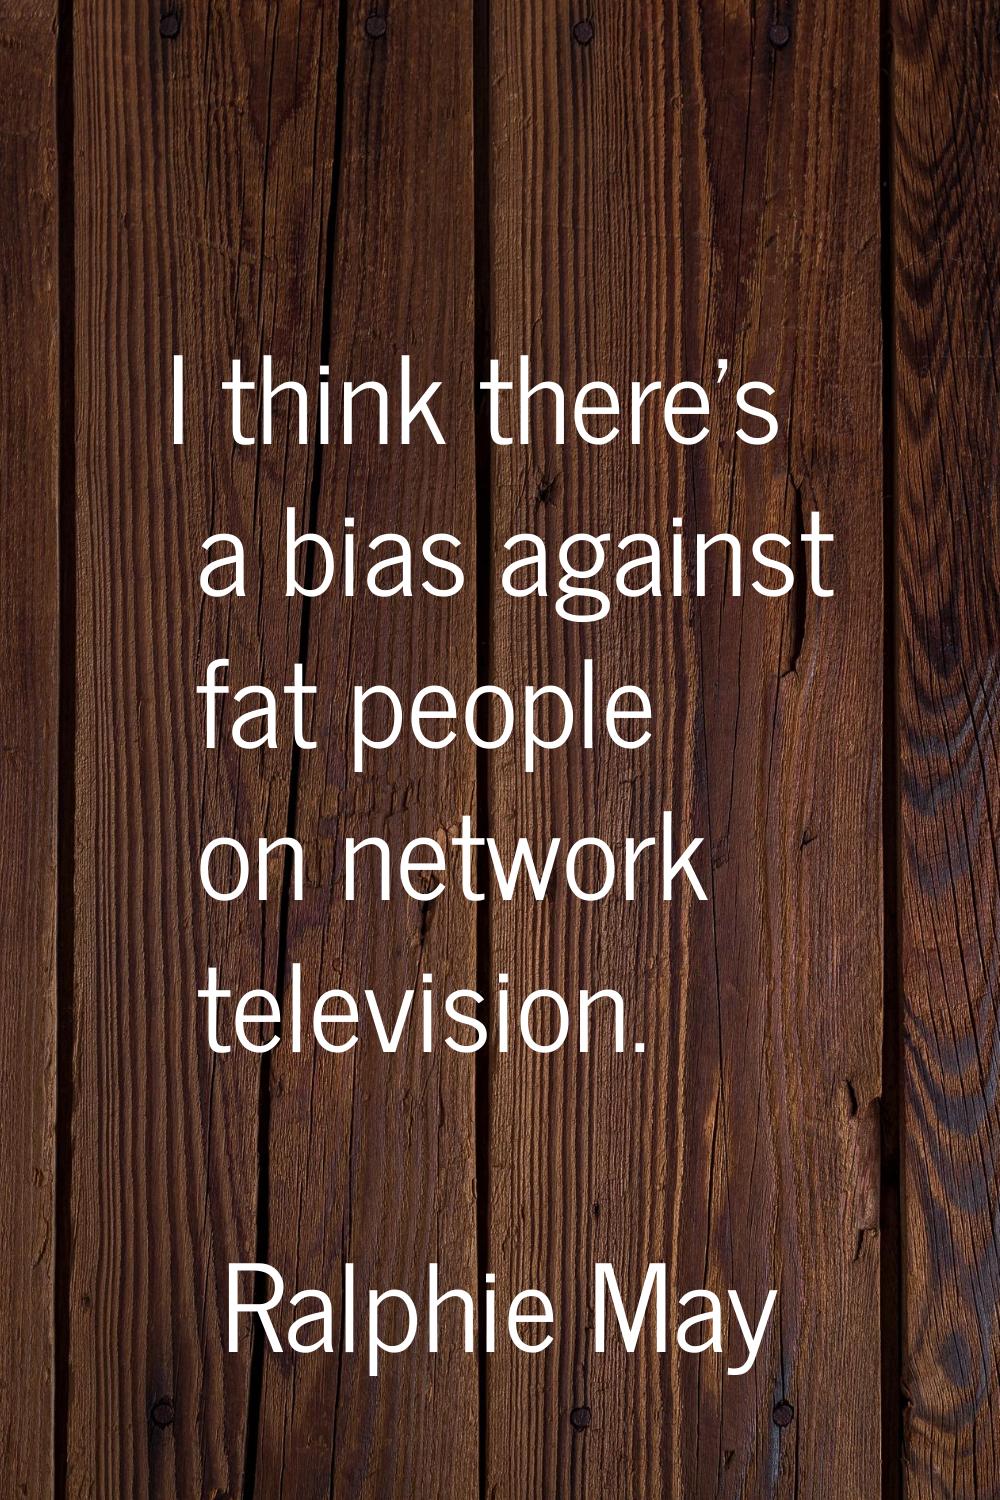 I think there's a bias against fat people on network television.